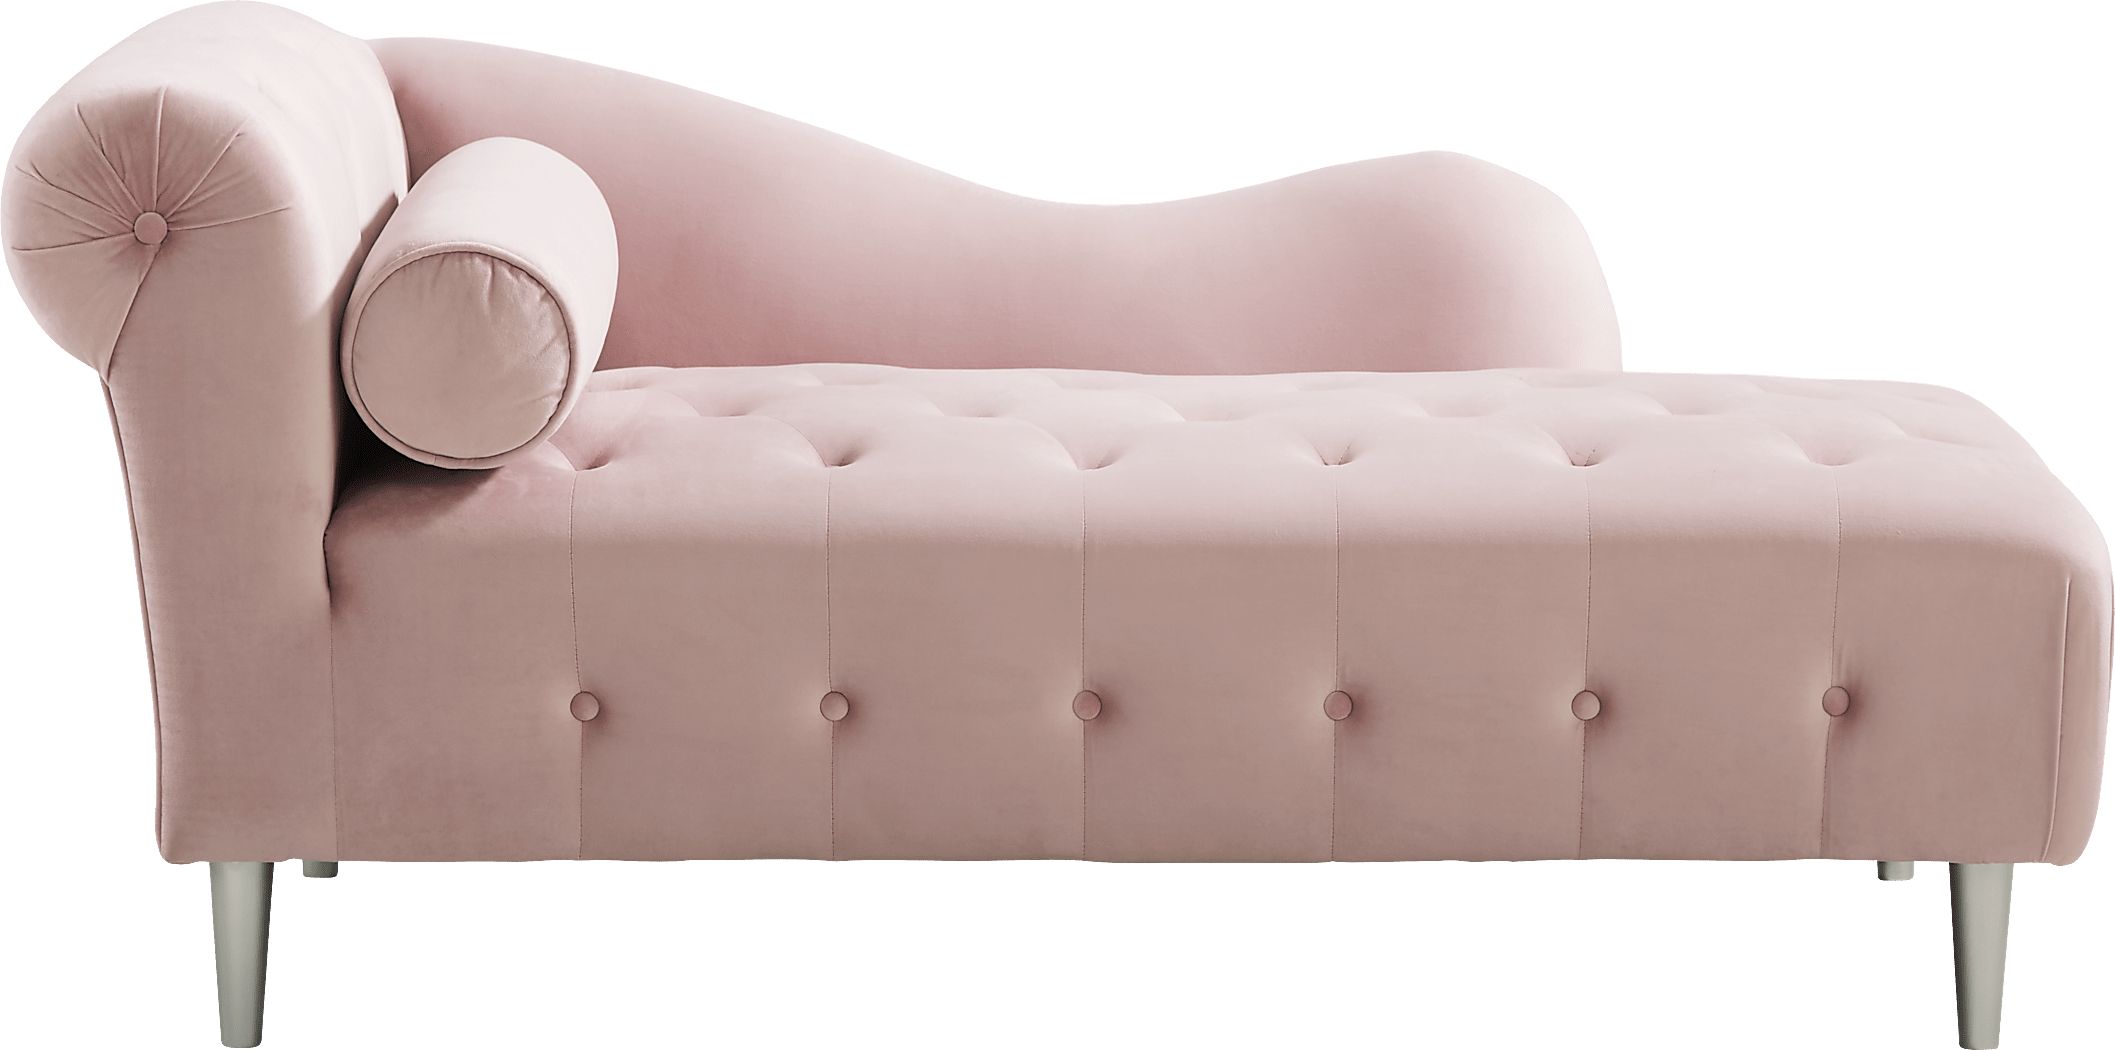 Rooms To Go Julietta Pink Chaise